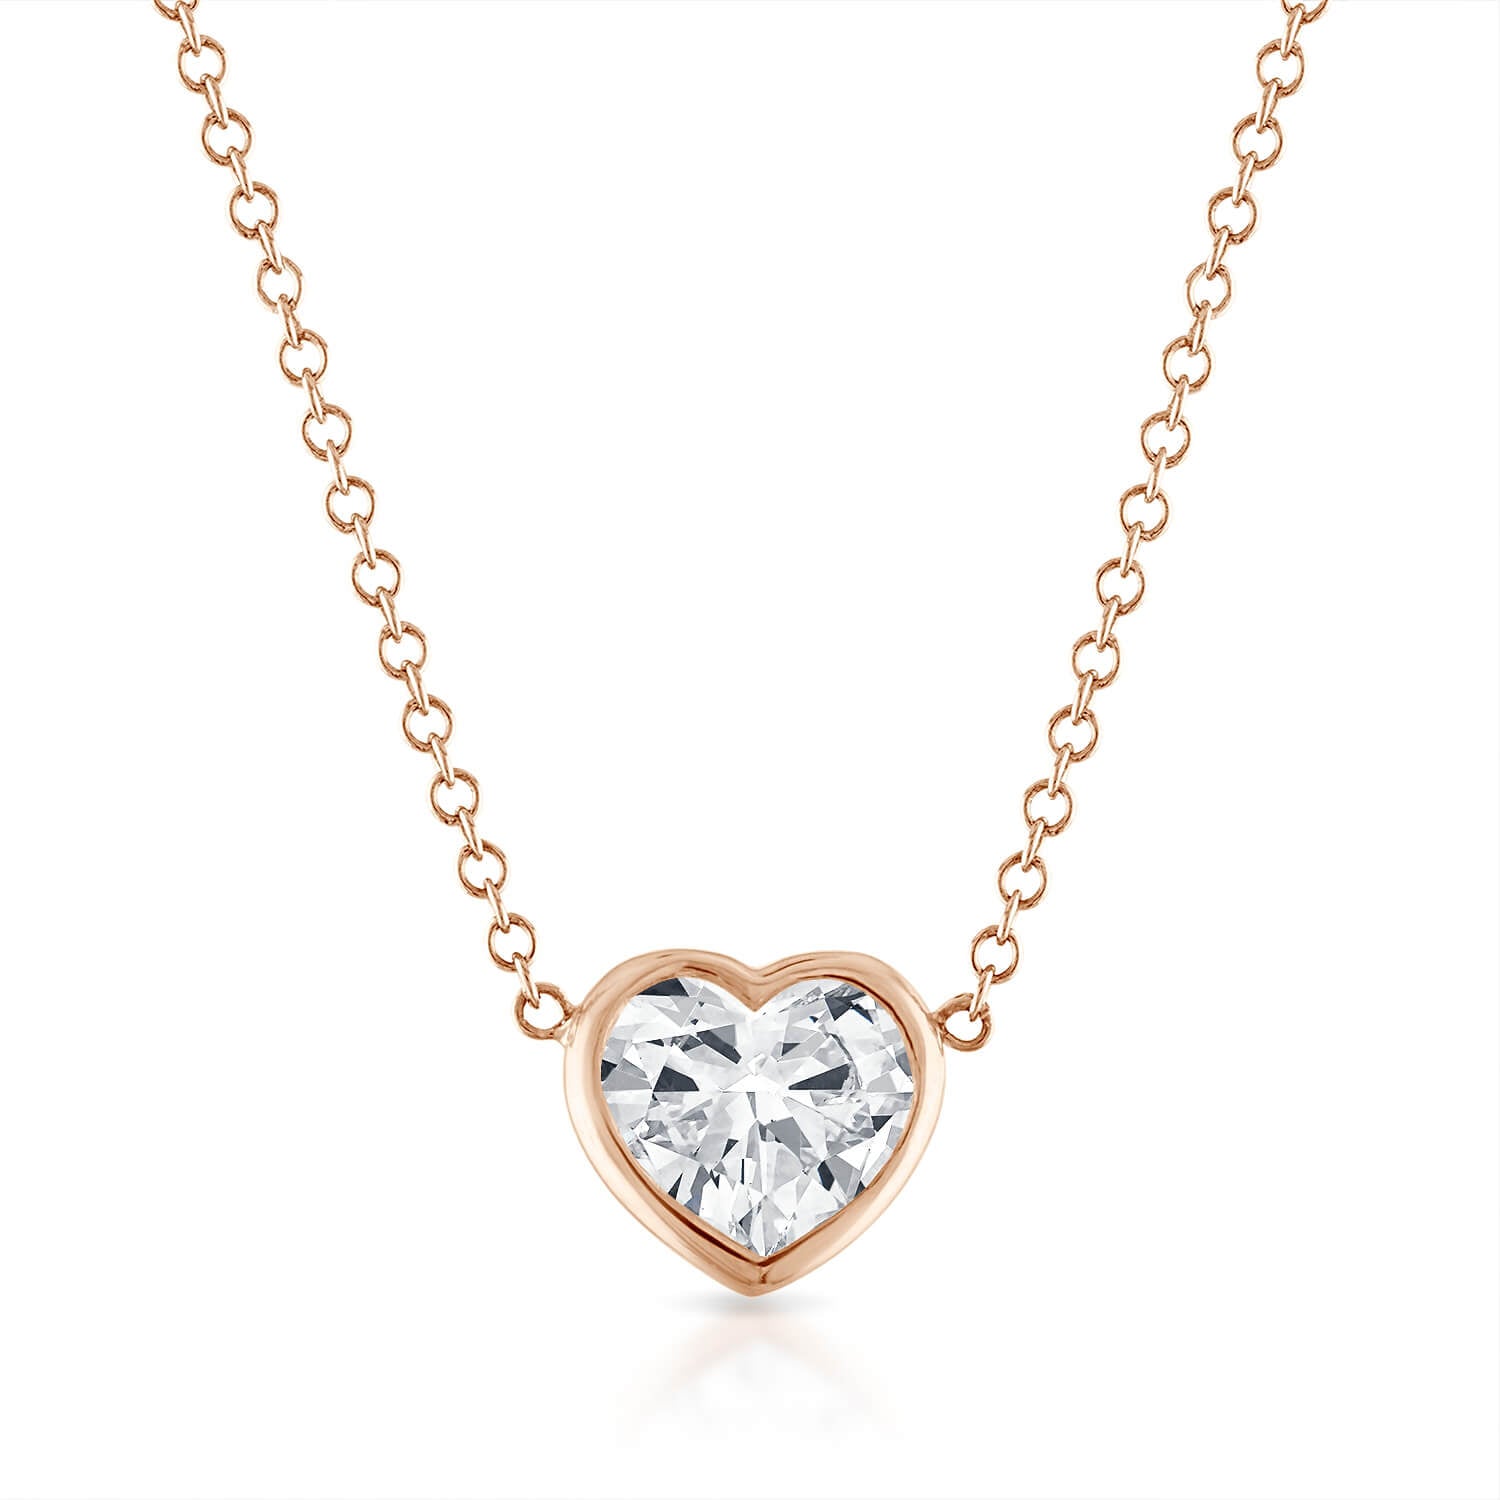 Fall in Love Necklace S00 - Fashion Jewelry